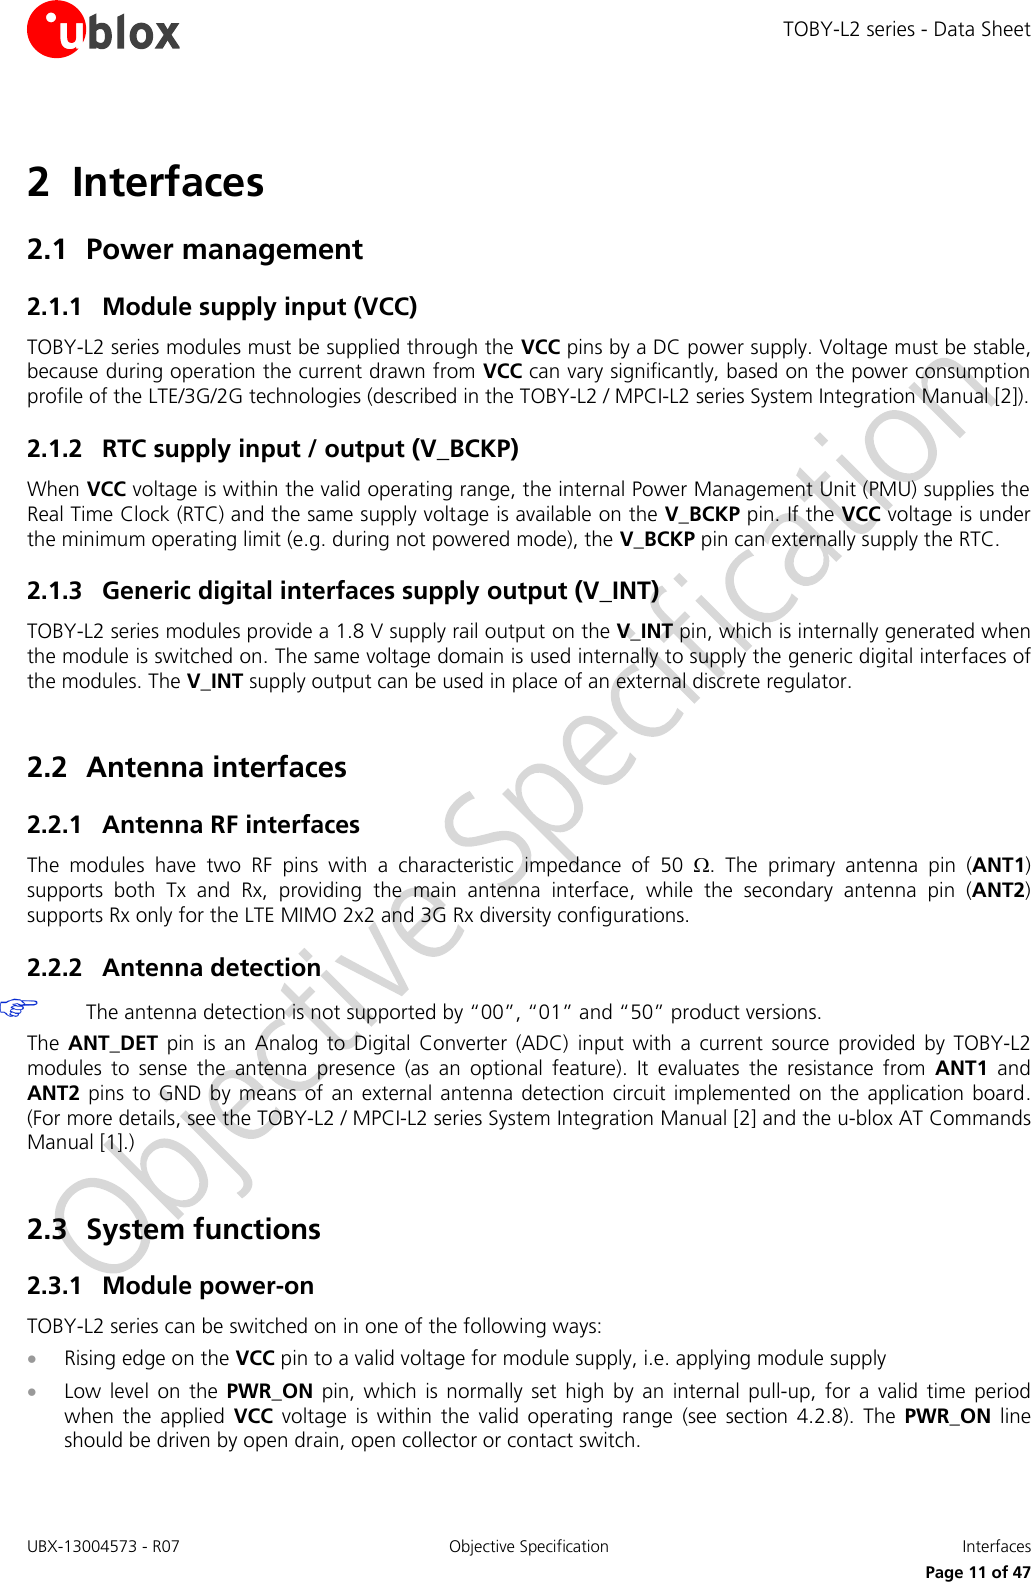 TOBY-L2 series - Data Sheet UBX-13004573 - R07  Objective Specification  Interfaces   Page 11 of 47 2 Interfaces 2.1 Power management 2.1.1 Module supply input (VCC) TOBY-L2 series modules must be supplied through the VCC pins by a DC power supply. Voltage must be stable, because during operation the current drawn from VCC can vary significantly, based on the power consumption profile of the LTE/3G/2G technologies (described in the TOBY-L2 / MPCI-L2 series System Integration Manual [2]). 2.1.2 RTC supply input / output (V_BCKP) When VCC voltage is within the valid operating range, the internal Power Management Unit (PMU) supplies the Real Time Clock (RTC) and the same supply voltage is available on the V_BCKP pin. If the VCC voltage is under the minimum operating limit (e.g. during not powered mode), the V_BCKP pin can externally supply the RTC. 2.1.3 Generic digital interfaces supply output (V_INT) TOBY-L2 series modules provide a 1.8 V supply rail output on the V_INT pin, which is internally generated when the module is switched on. The same voltage domain is used internally to supply the generic digital interfaces of the modules. The V_INT supply output can be used in place of an external discrete regulator.  2.2 Antenna interfaces 2.2.1 Antenna RF interfaces The  modules  have  two  RF  pins  with  a  characteristic  impedance  of  50  .  The  primary  antenna  pin  (ANT1) supports  both  Tx  and  Rx,  providing  the  main  antenna  interface,  while  the  secondary  antenna  pin  (ANT2) supports Rx only for the LTE MIMO 2x2 and 3G Rx diversity configurations. 2.2.2 Antenna detection  The antenna detection is not supported by “00”, “01” and “50” product versions. The  ANT_DET  pin is  an  Analog to  Digital  Converter  (ADC)  input  with  a  current  source  provided  by TOBY-L2 modules  to  sense  the  antenna  presence  (as  an  optional  feature).  It  evaluates  the  resistance  from  ANT1  and ANT2 pins to  GND  by means of  an  external  antenna detection circuit  implemented on  the  application board. (For more details, see the TOBY-L2 / MPCI-L2 series System Integration Manual [2] and the u-blox AT Commands Manual [1].)  2.3 System functions 2.3.1 Module power-on  TOBY-L2 series can be switched on in one of the following ways:  Rising edge on the VCC pin to a valid voltage for module supply, i.e. applying module supply  Low  level  on  the  PWR_ON  pin,  which  is  normally  set  high  by  an  internal  pull-up,  for  a valid  time  period when  the  applied  VCC  voltage  is  within  the  valid  operating  range  (see  section  4.2.8).  The  PWR_ON  line should be driven by open drain, open collector or contact switch. 